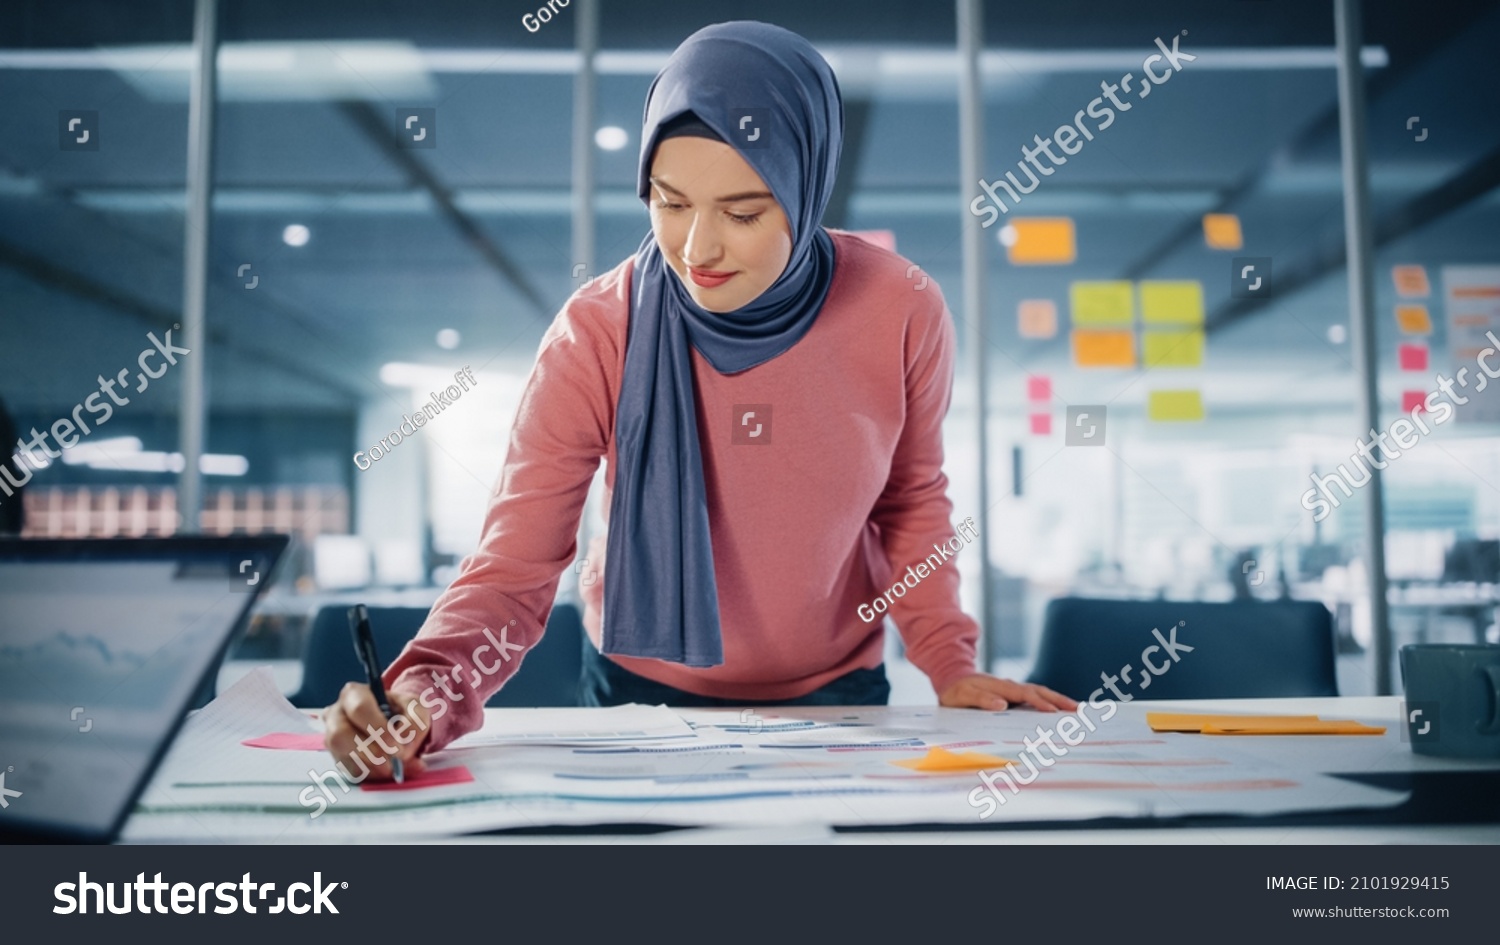 Modern Office: Motivated Muslim Businesswoman Wearing Hijab Works on Engineering Project, Does Document and Blueprints Analysis. Empowered Digital Entrepreneur Works on e-Commerce Startup Project #2101929415